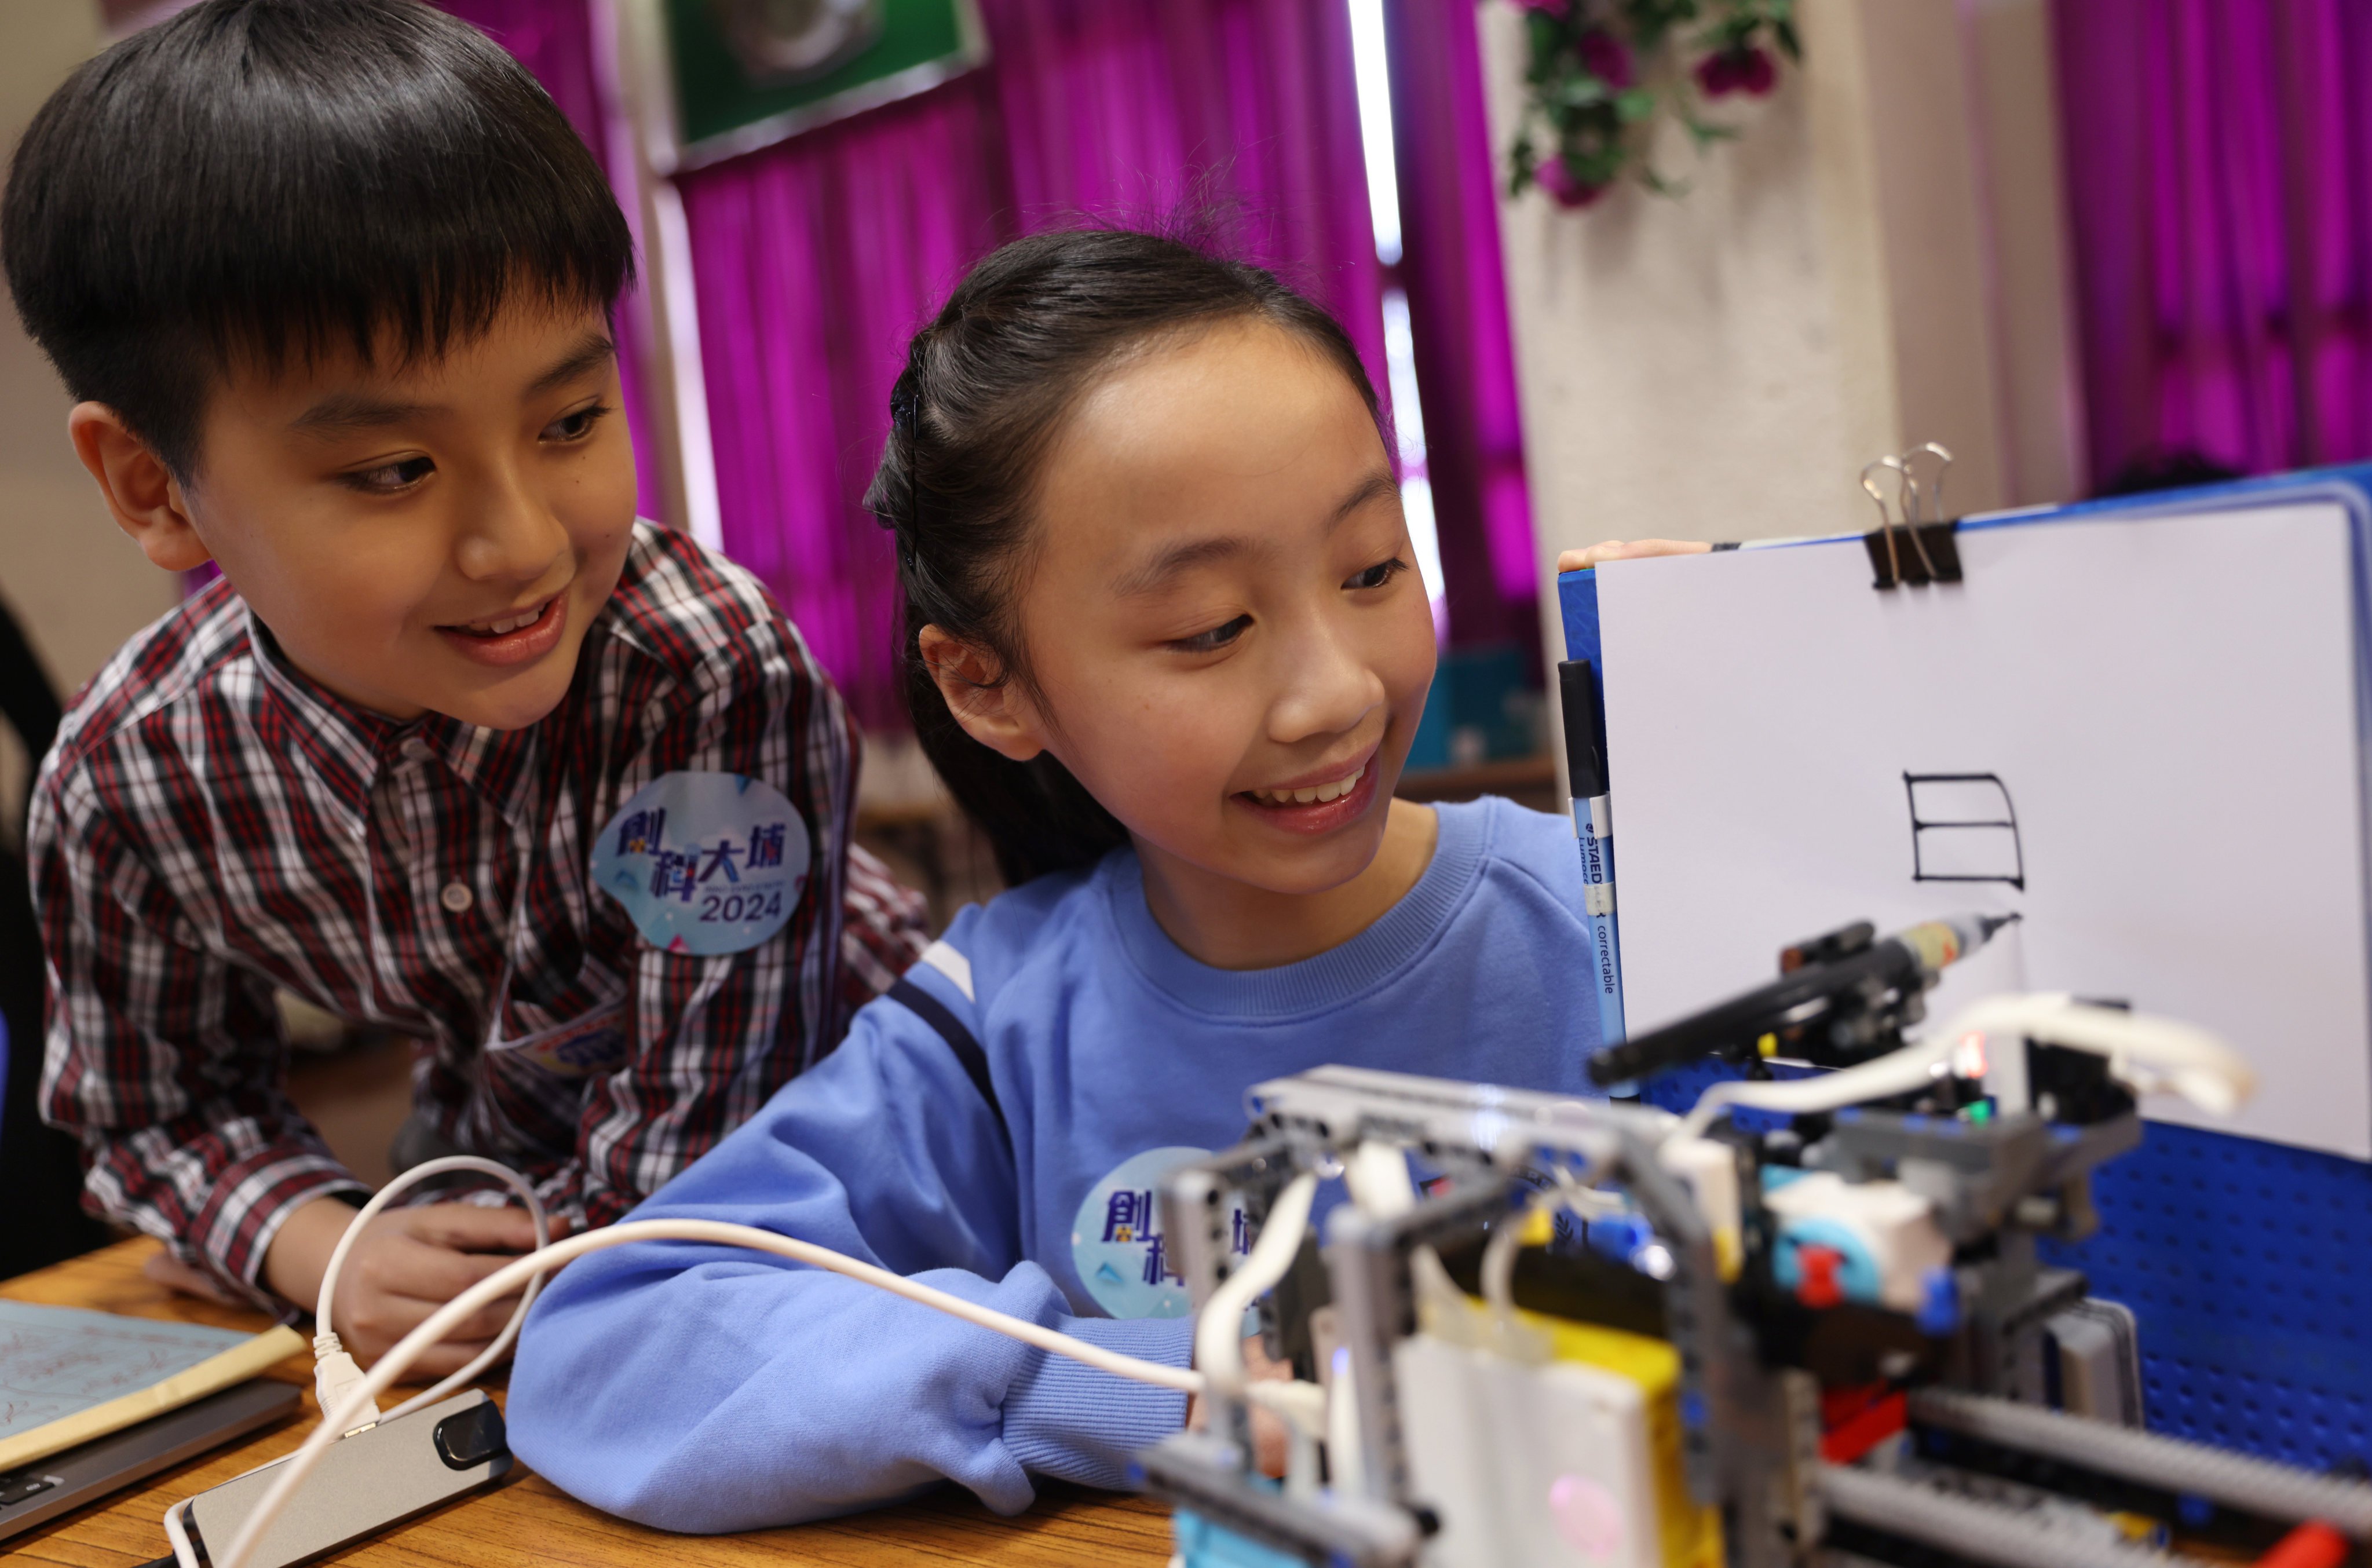 Two primary school students in Hong Kong show their invention at an expo that showcases the technological innovations by student inventors, on January 16 in Hong Kong’s Tai Po district. Photo: Yik Yeung-man